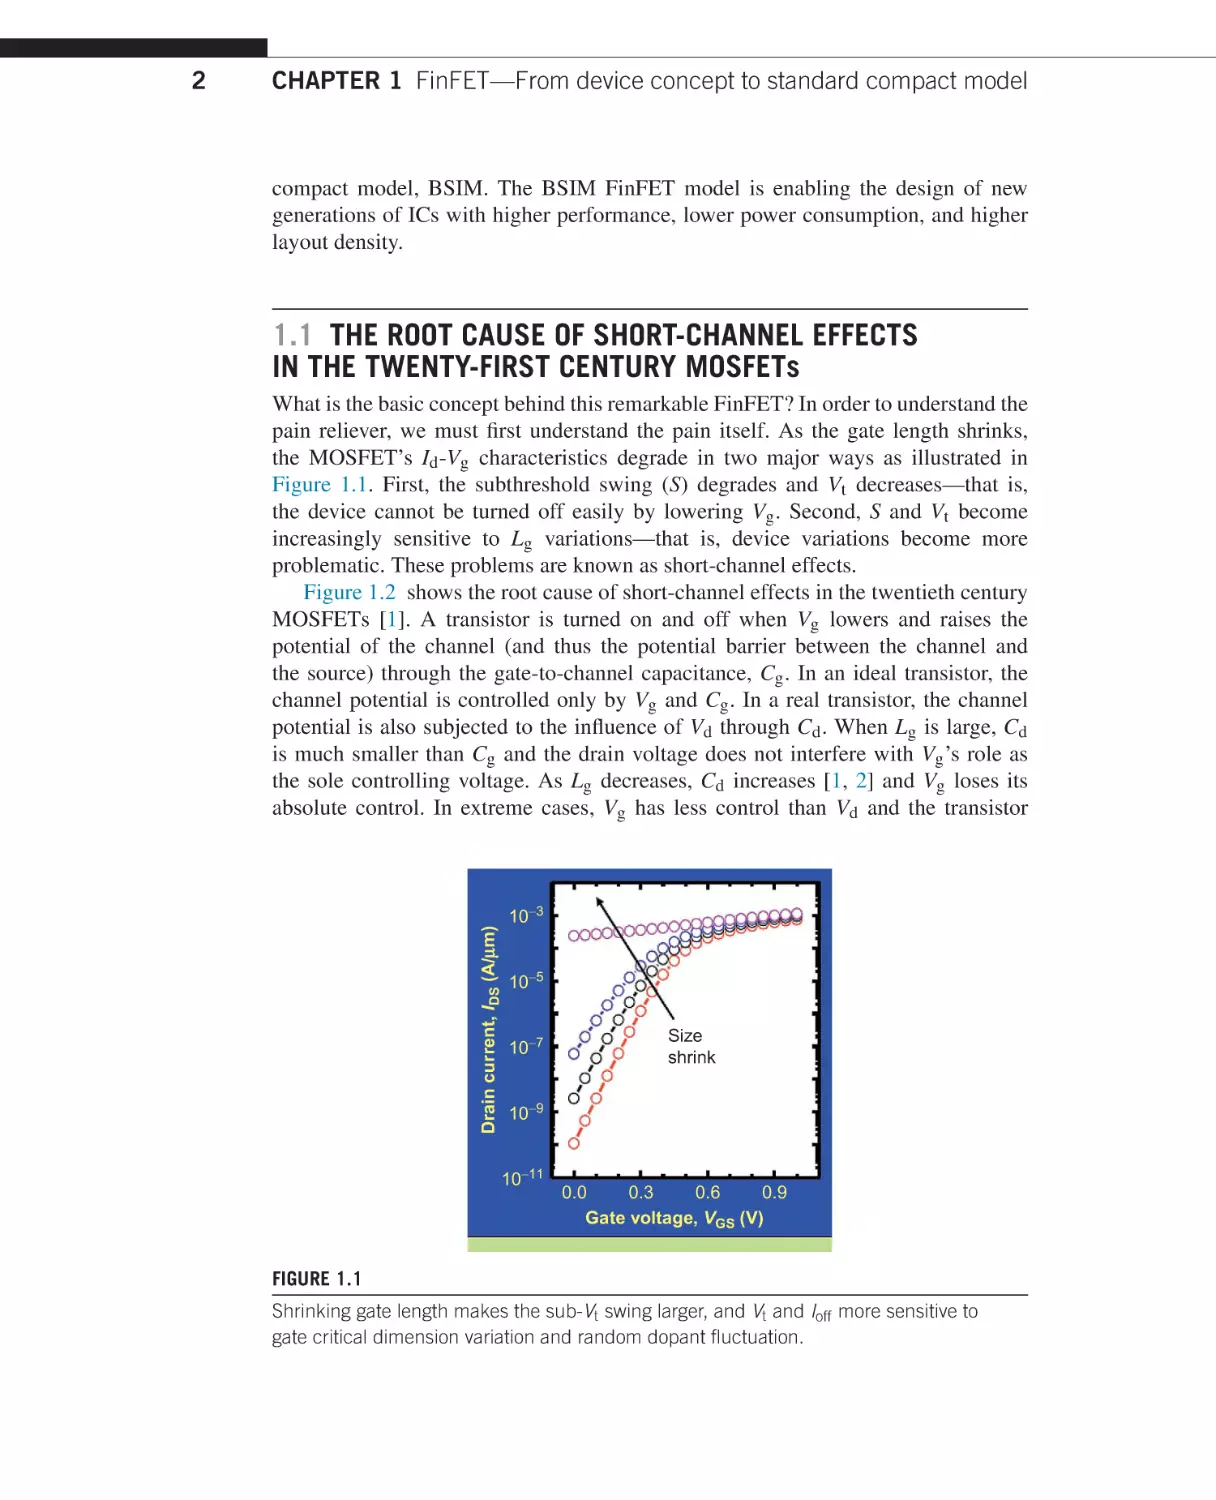 The root cause of short-channel effects in the twenty-first century MOSFETs